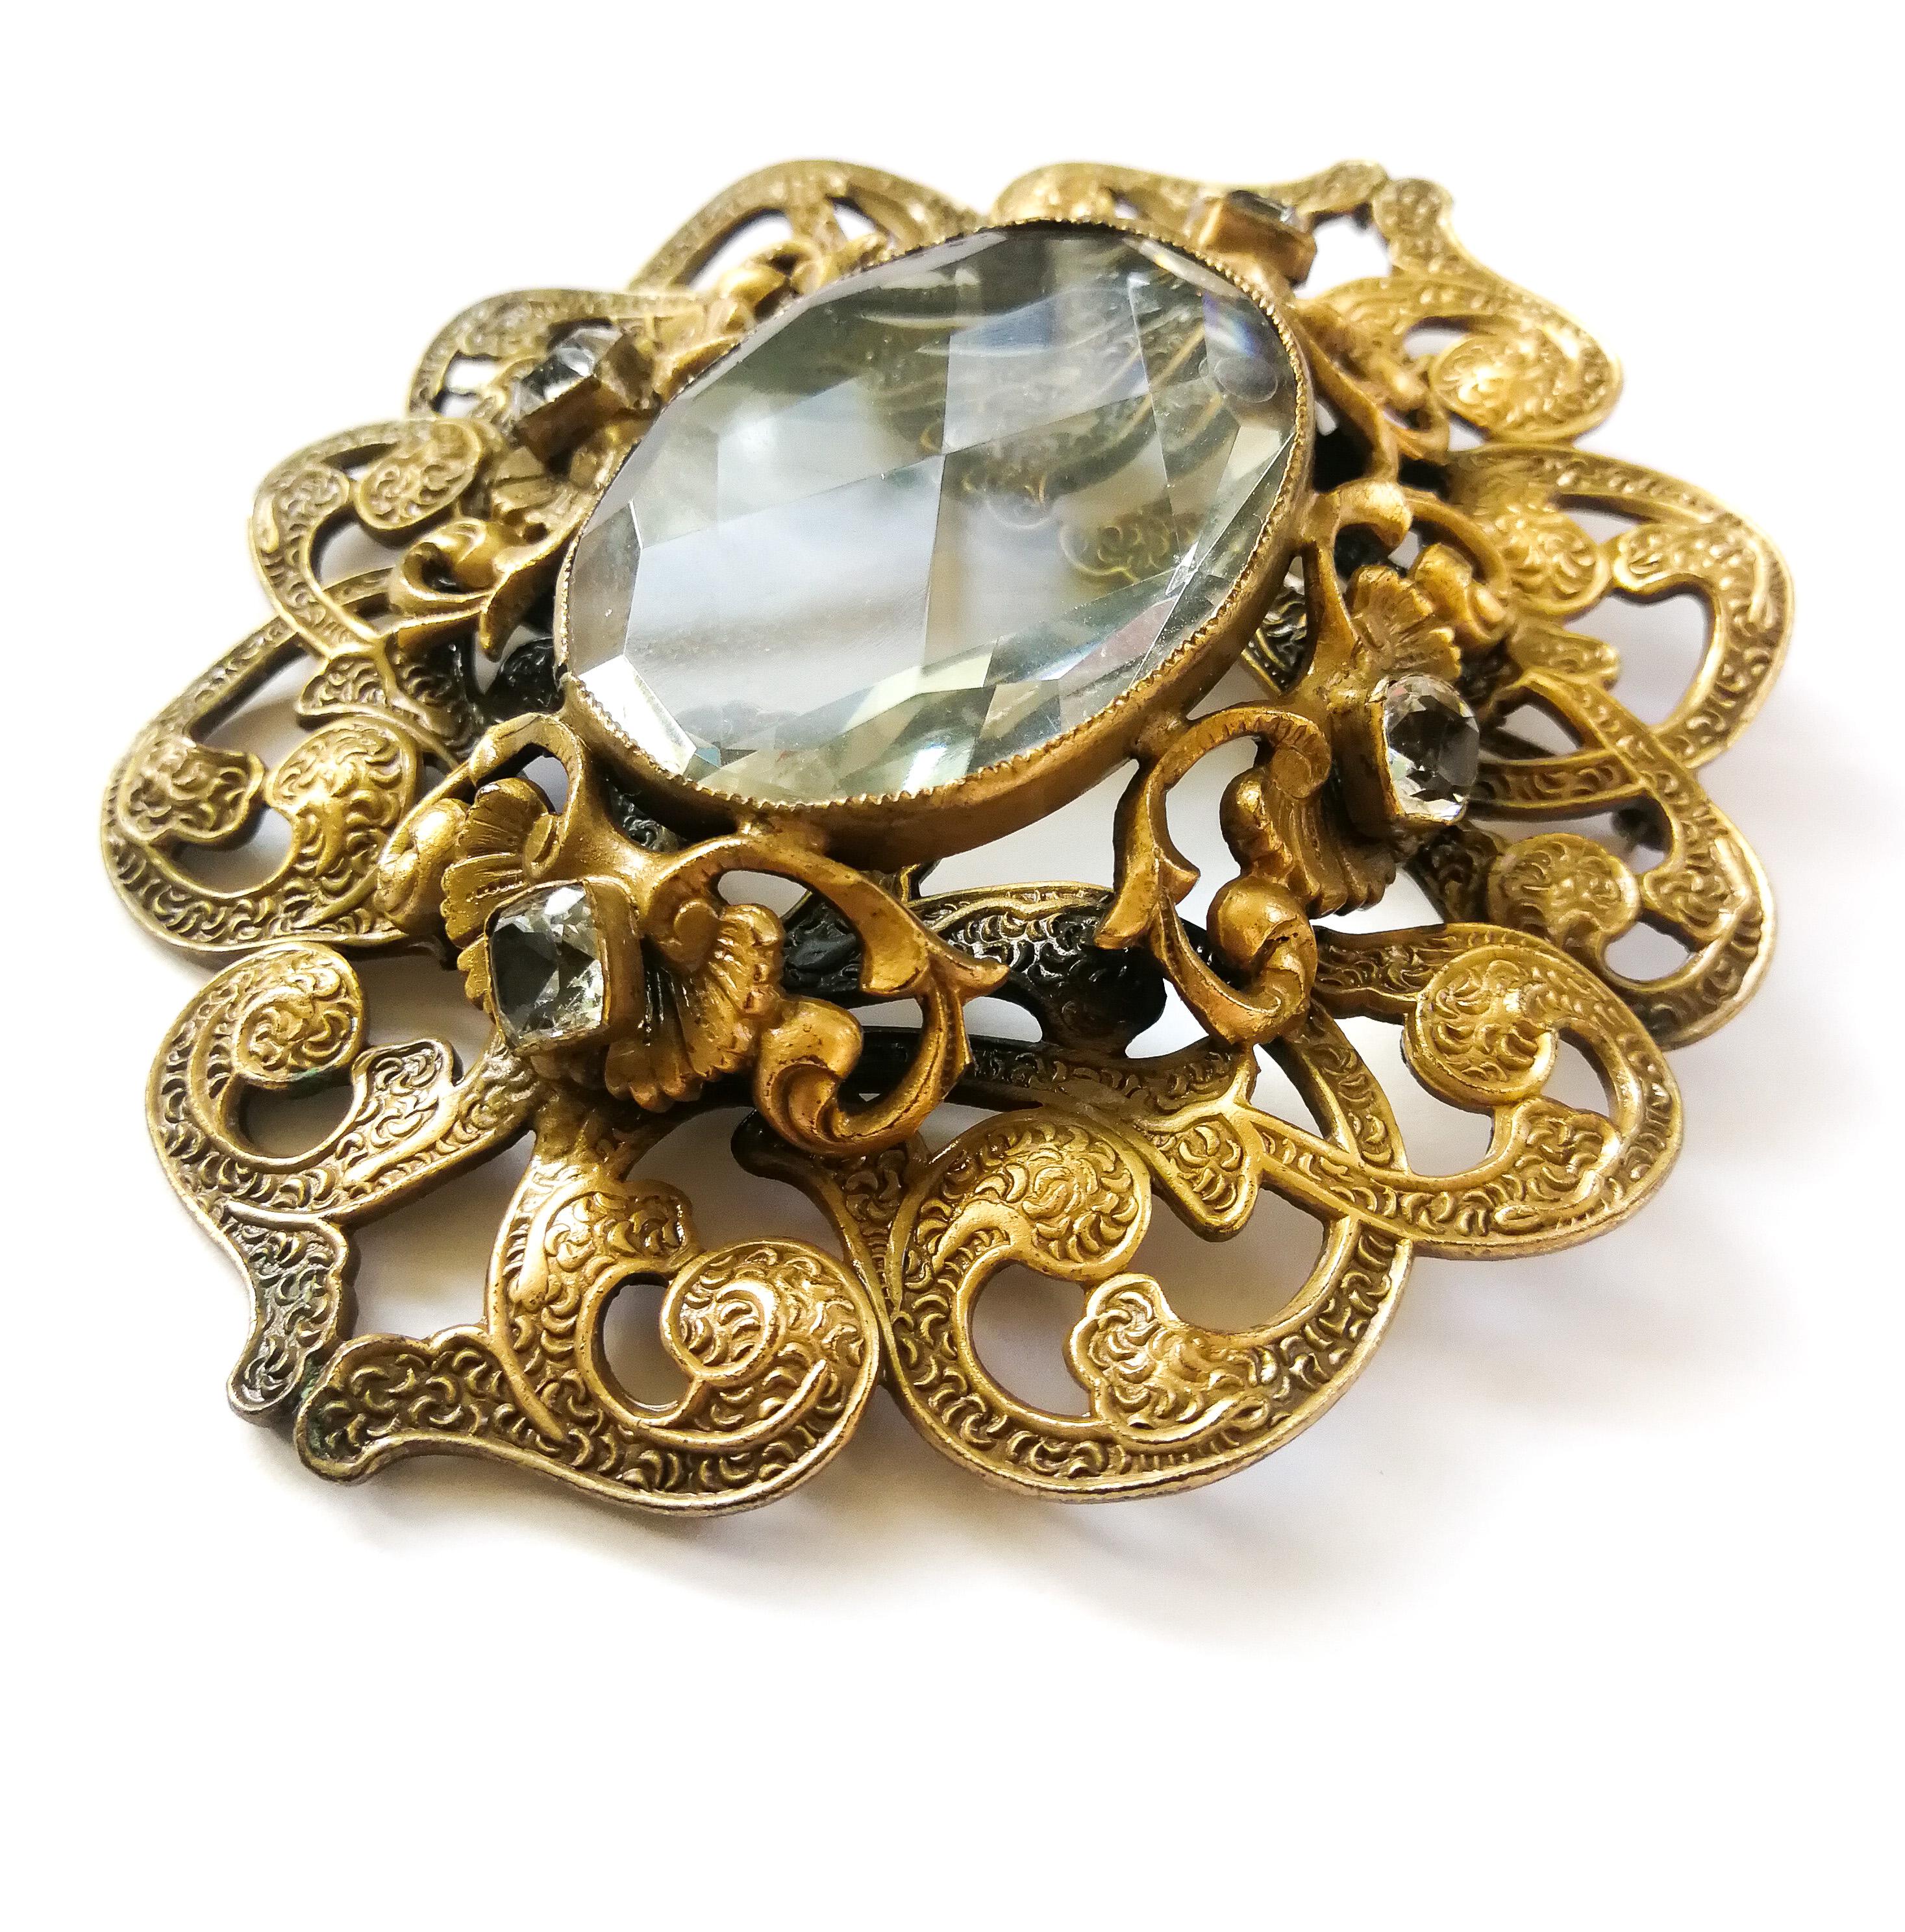 A large and exceptional brooch from Joseff of Hollywood, dating from the 1940s, and made from antique 'Russian' gilded metal, with a beautiful central crystal stone, which is softly faceted. The metal work is beautifully textured, in a soft swirling